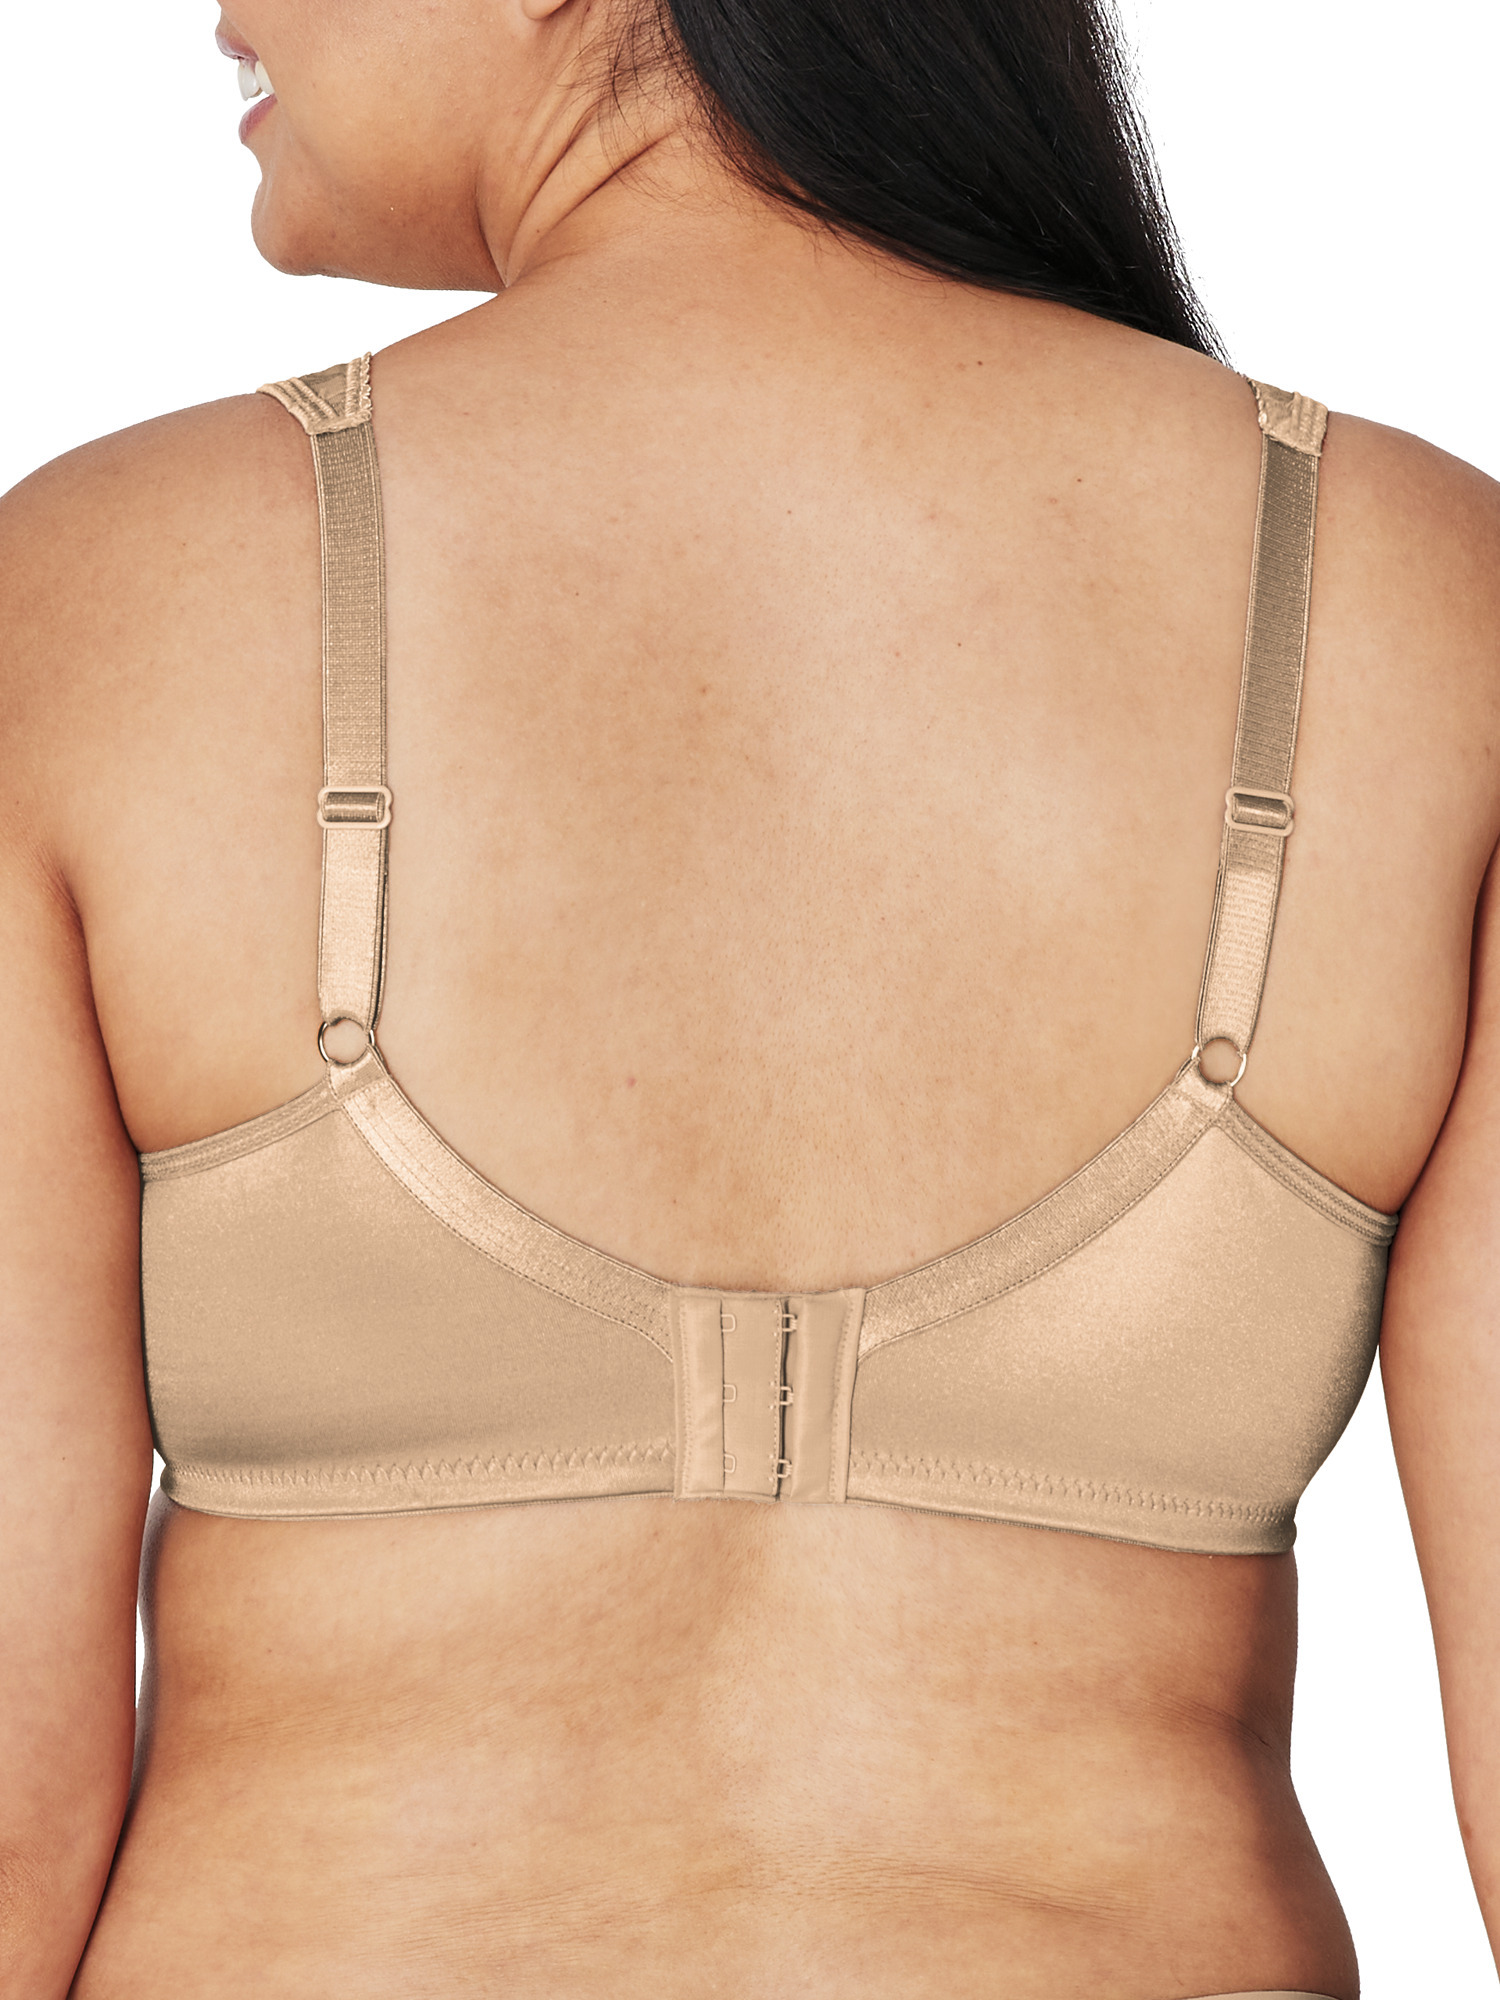 Playtex Women's 18 Hour Ultimate Lift and Support Wire Bra Nude